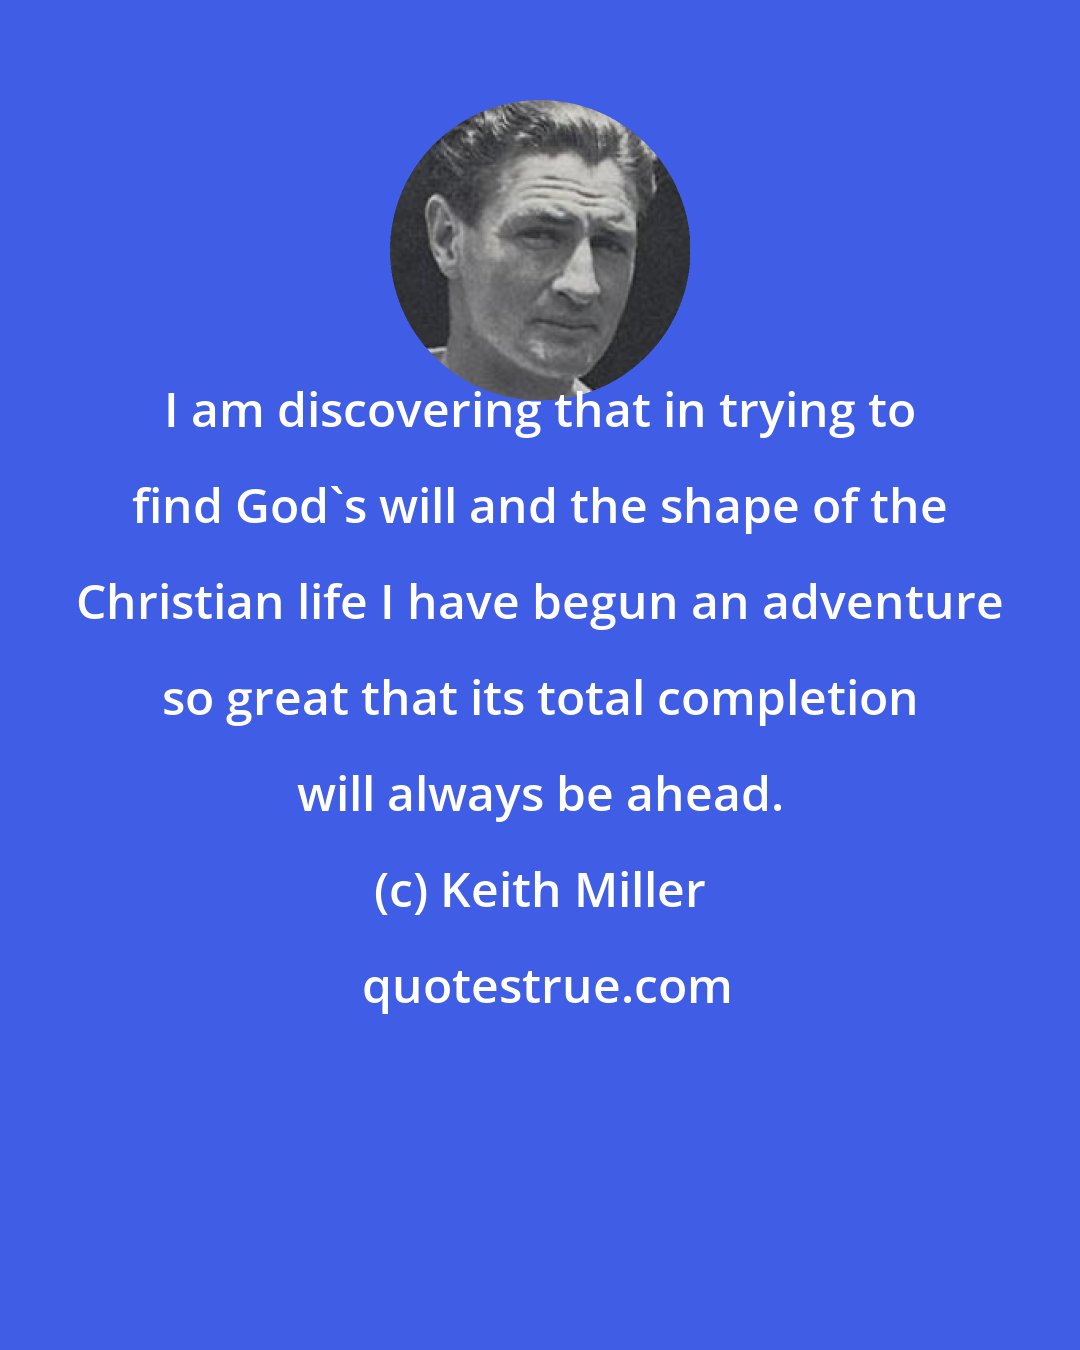 Keith Miller: I am discovering that in trying to find God's will and the shape of the Christian life I have begun an adventure so great that its total completion will always be ahead.